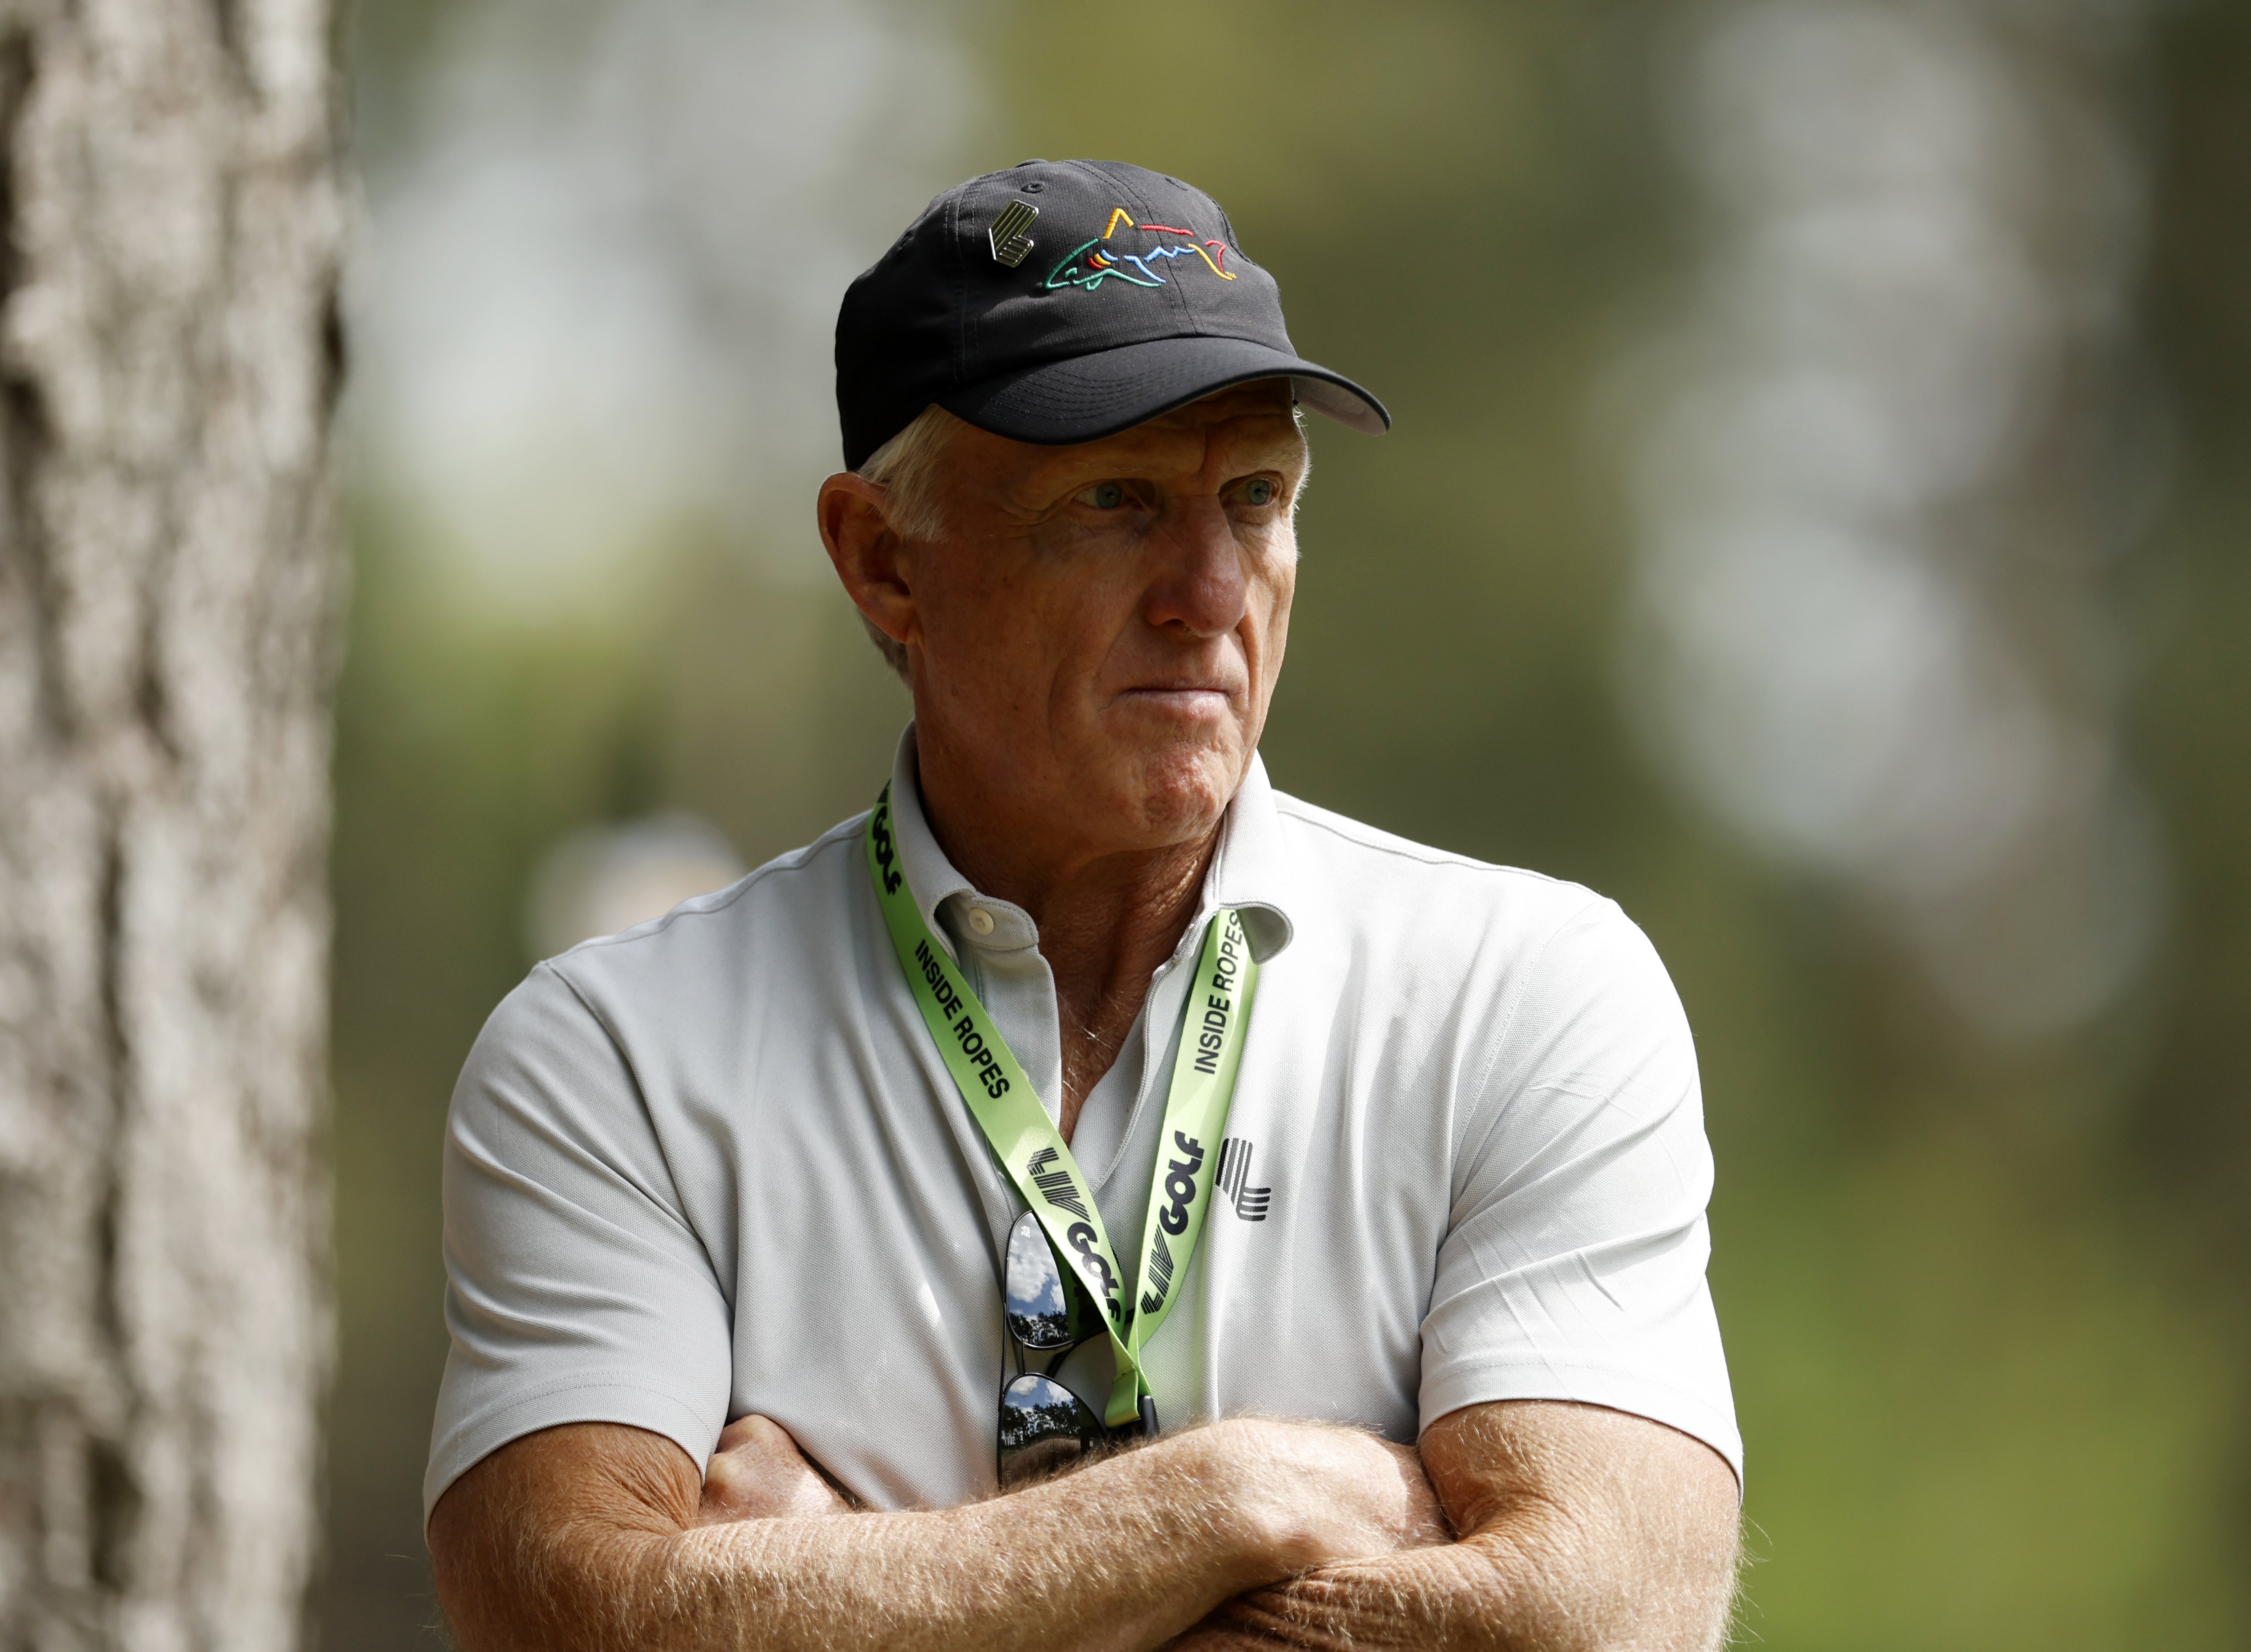 LIV Golf CEO Greg Norman during day two of the LIV Golf Invitational Series at the Centurion Club, Hertfordshire (Steven Paston/PA)